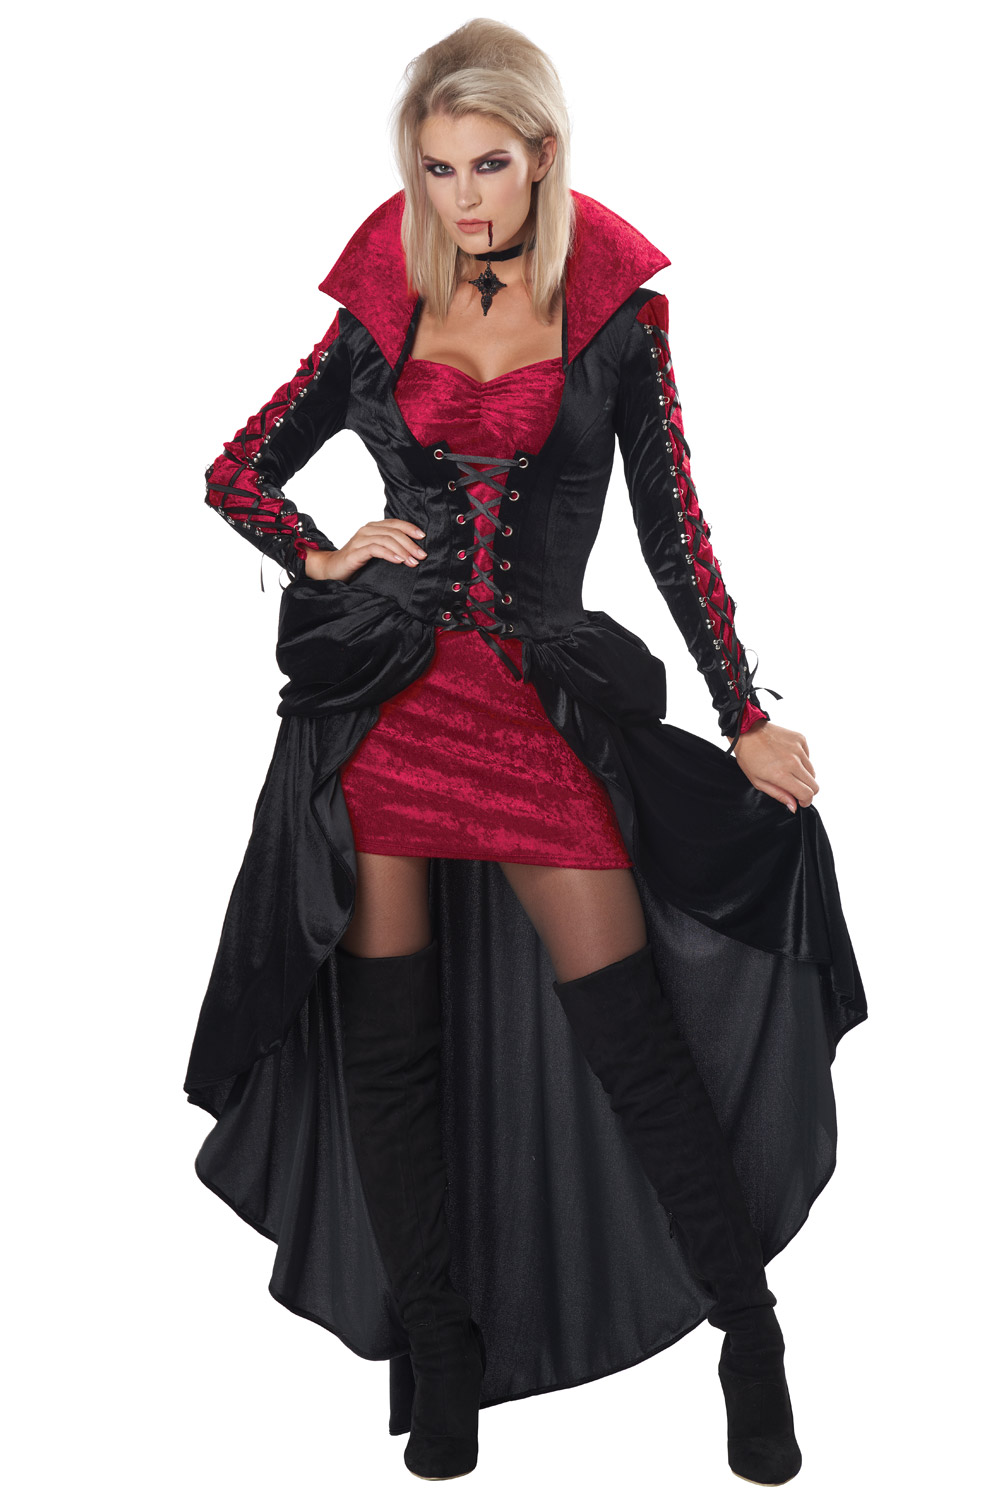 Nothing says Halloween like a classic vampire costume. 